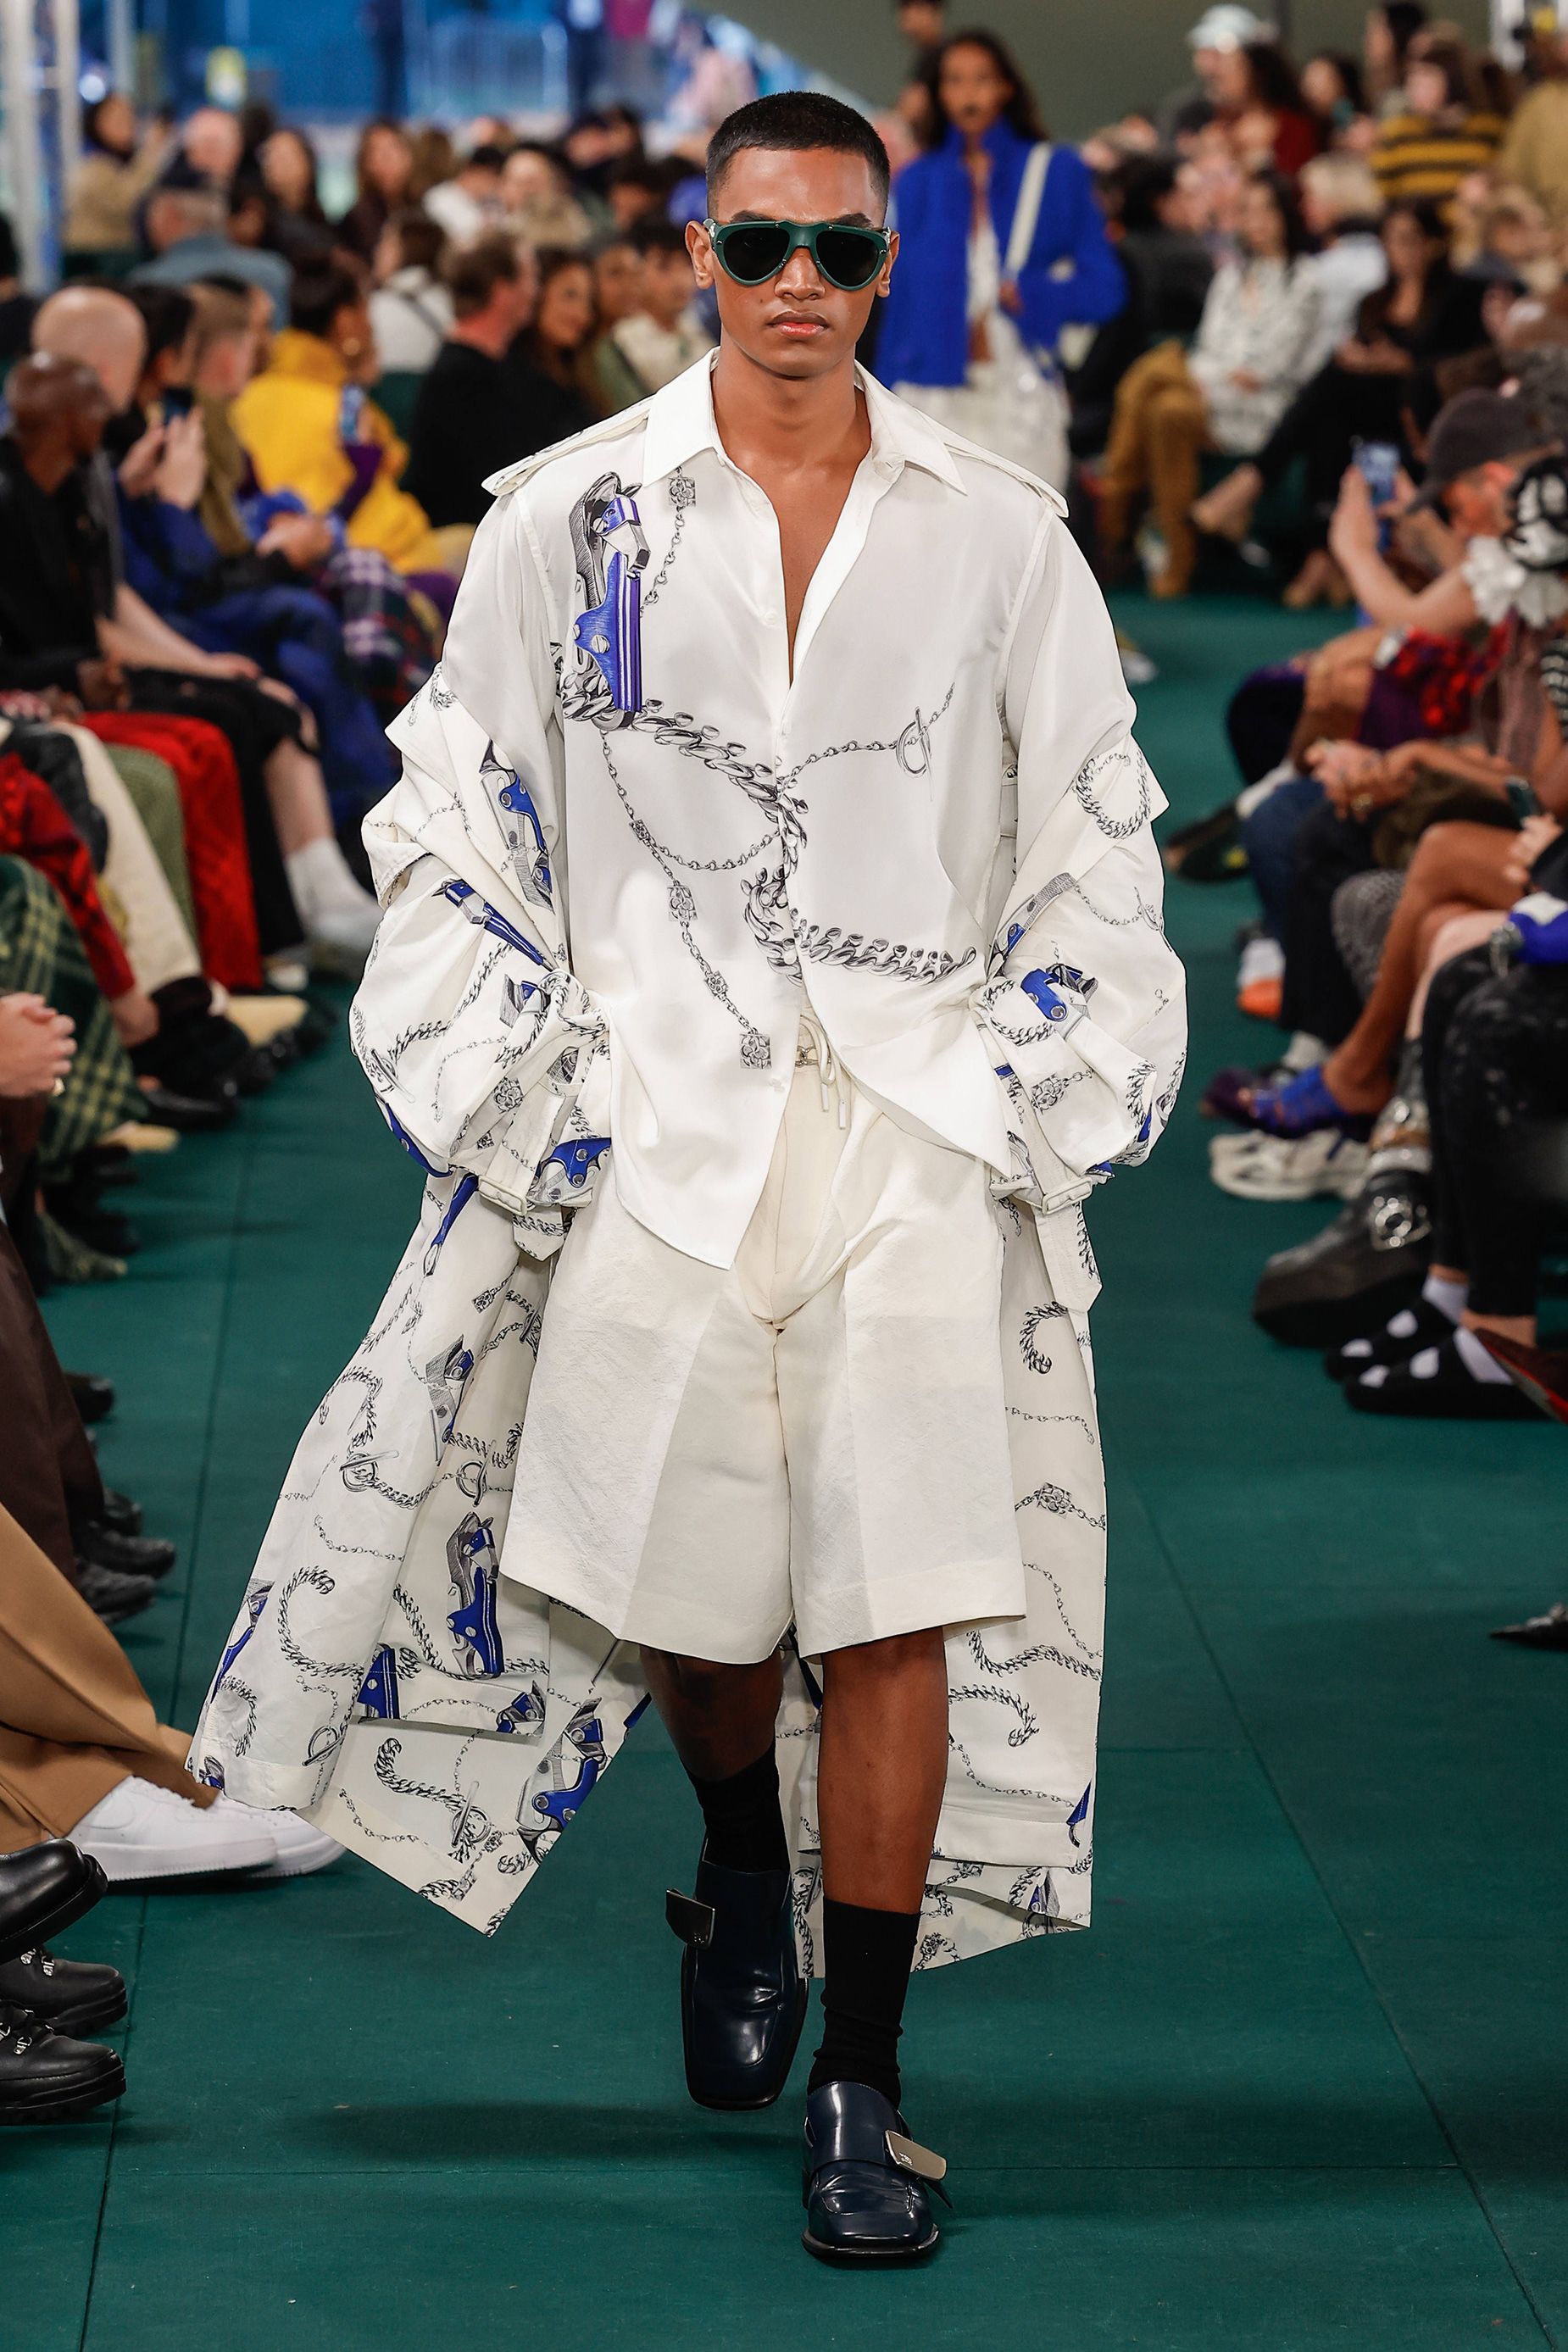 Mandatory Credit: Photo by Pixelformula/SIPA/Shutterstock (14108364a)
A model wearing an original creation from the womenswear summer 2024 collections in London from the house of Burberry
Womenswear, summer 2024, London, Burberry, Gbr - 19 Sep 2023